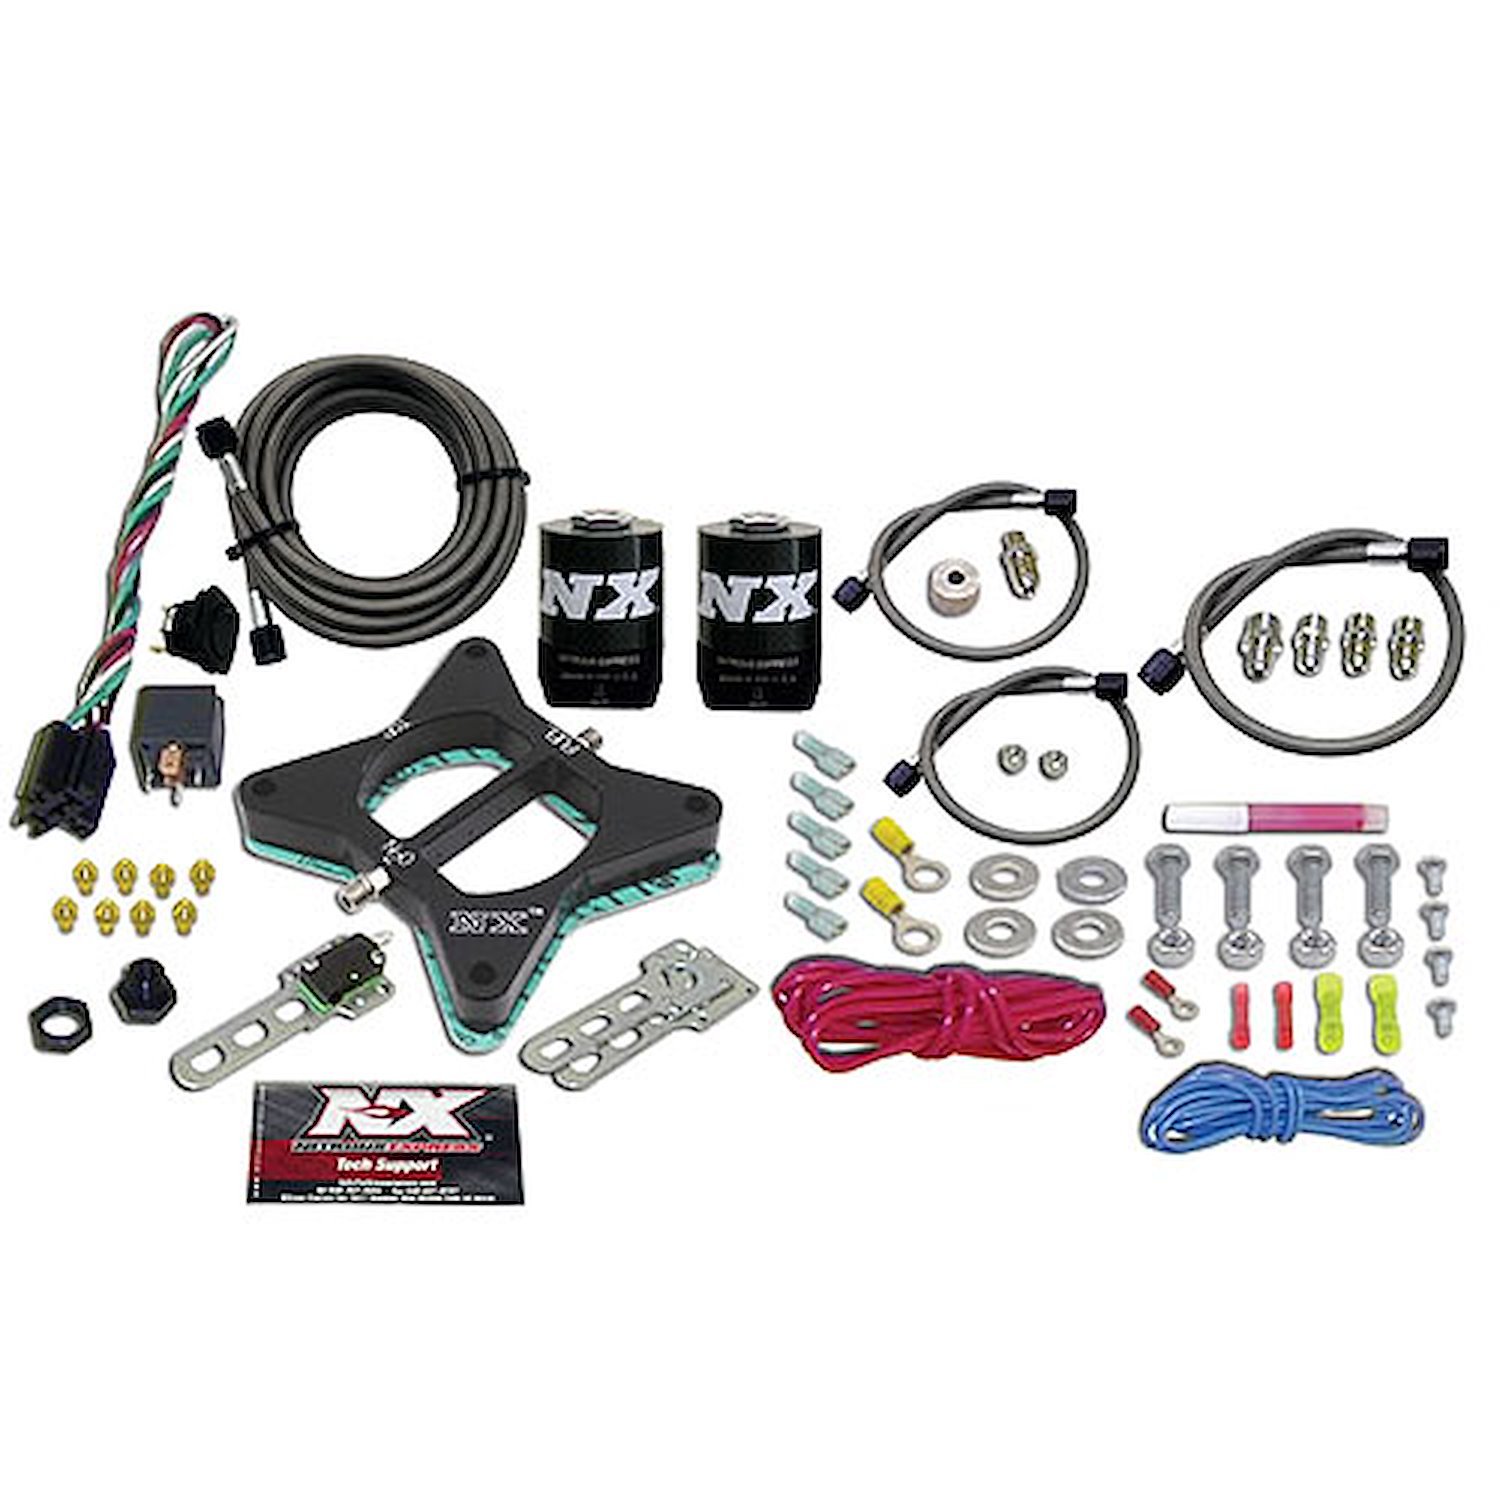 Ford 4.6L 2-Valve Nitrous Plate System 1996-2004 Mustang GT & Fords w/4.6L 2V